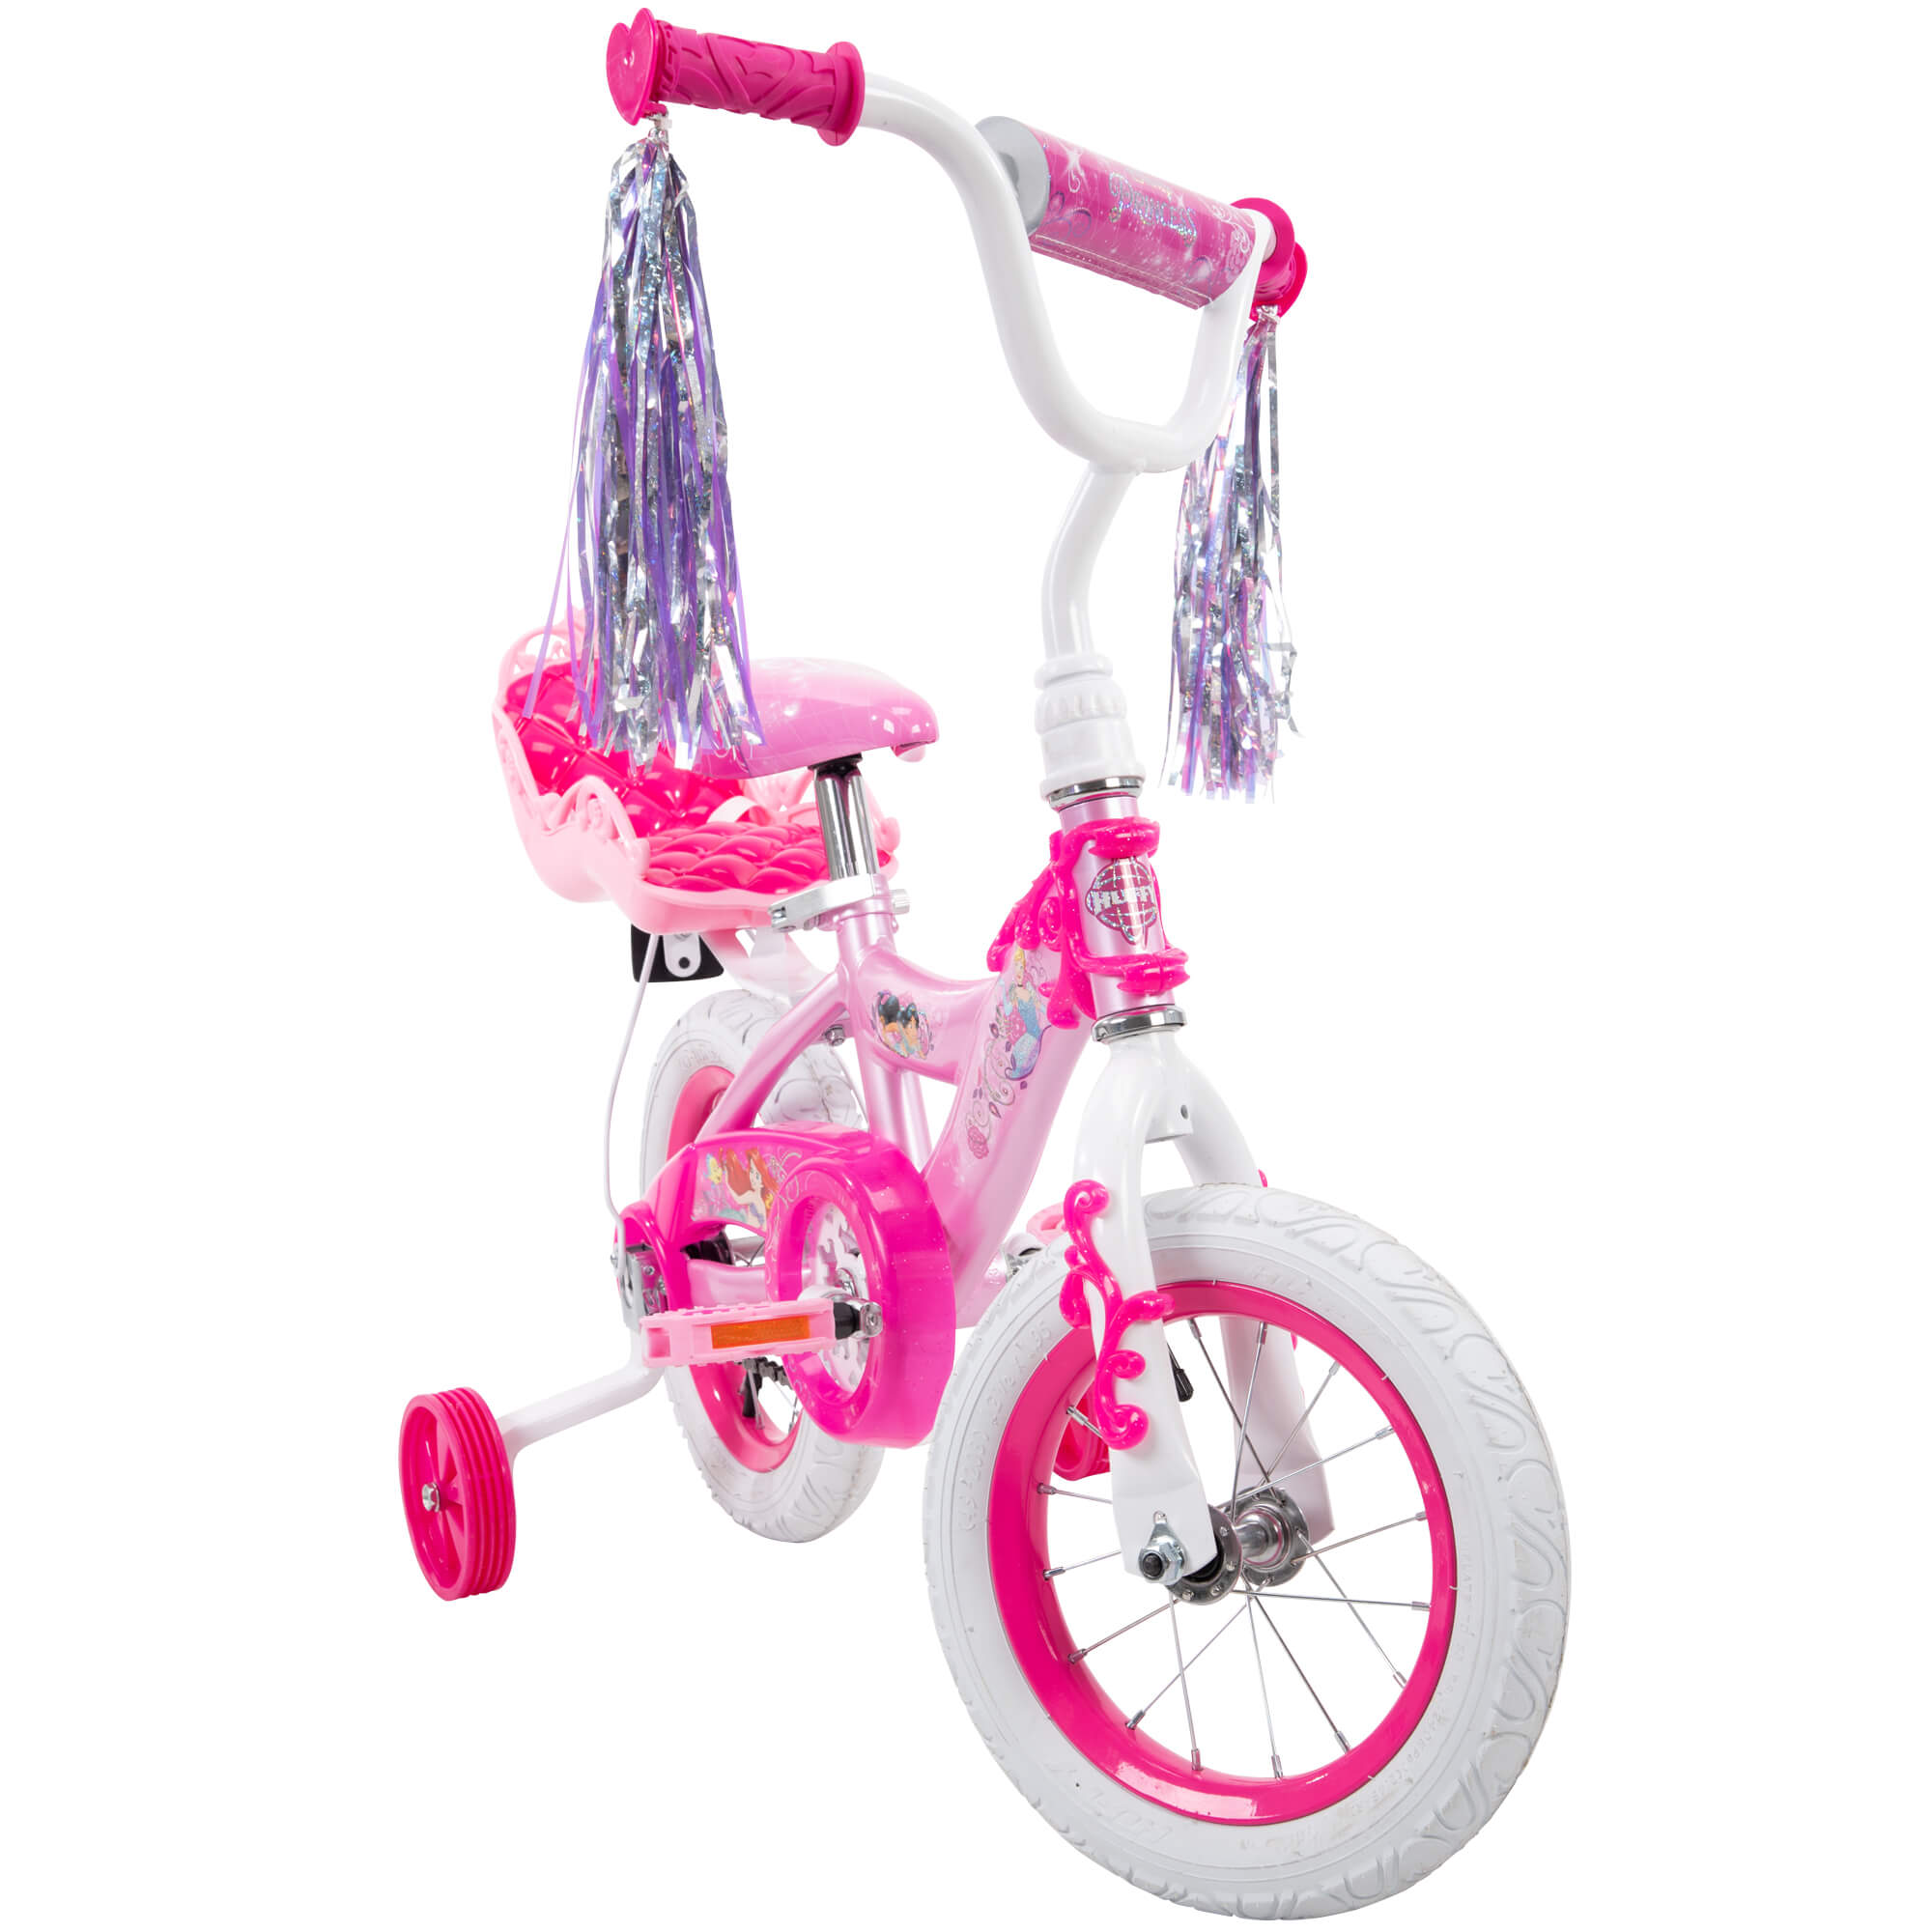 Disney Princess Girls' 12" Bike with Doll Carrier by Huffy - image 5 of 12